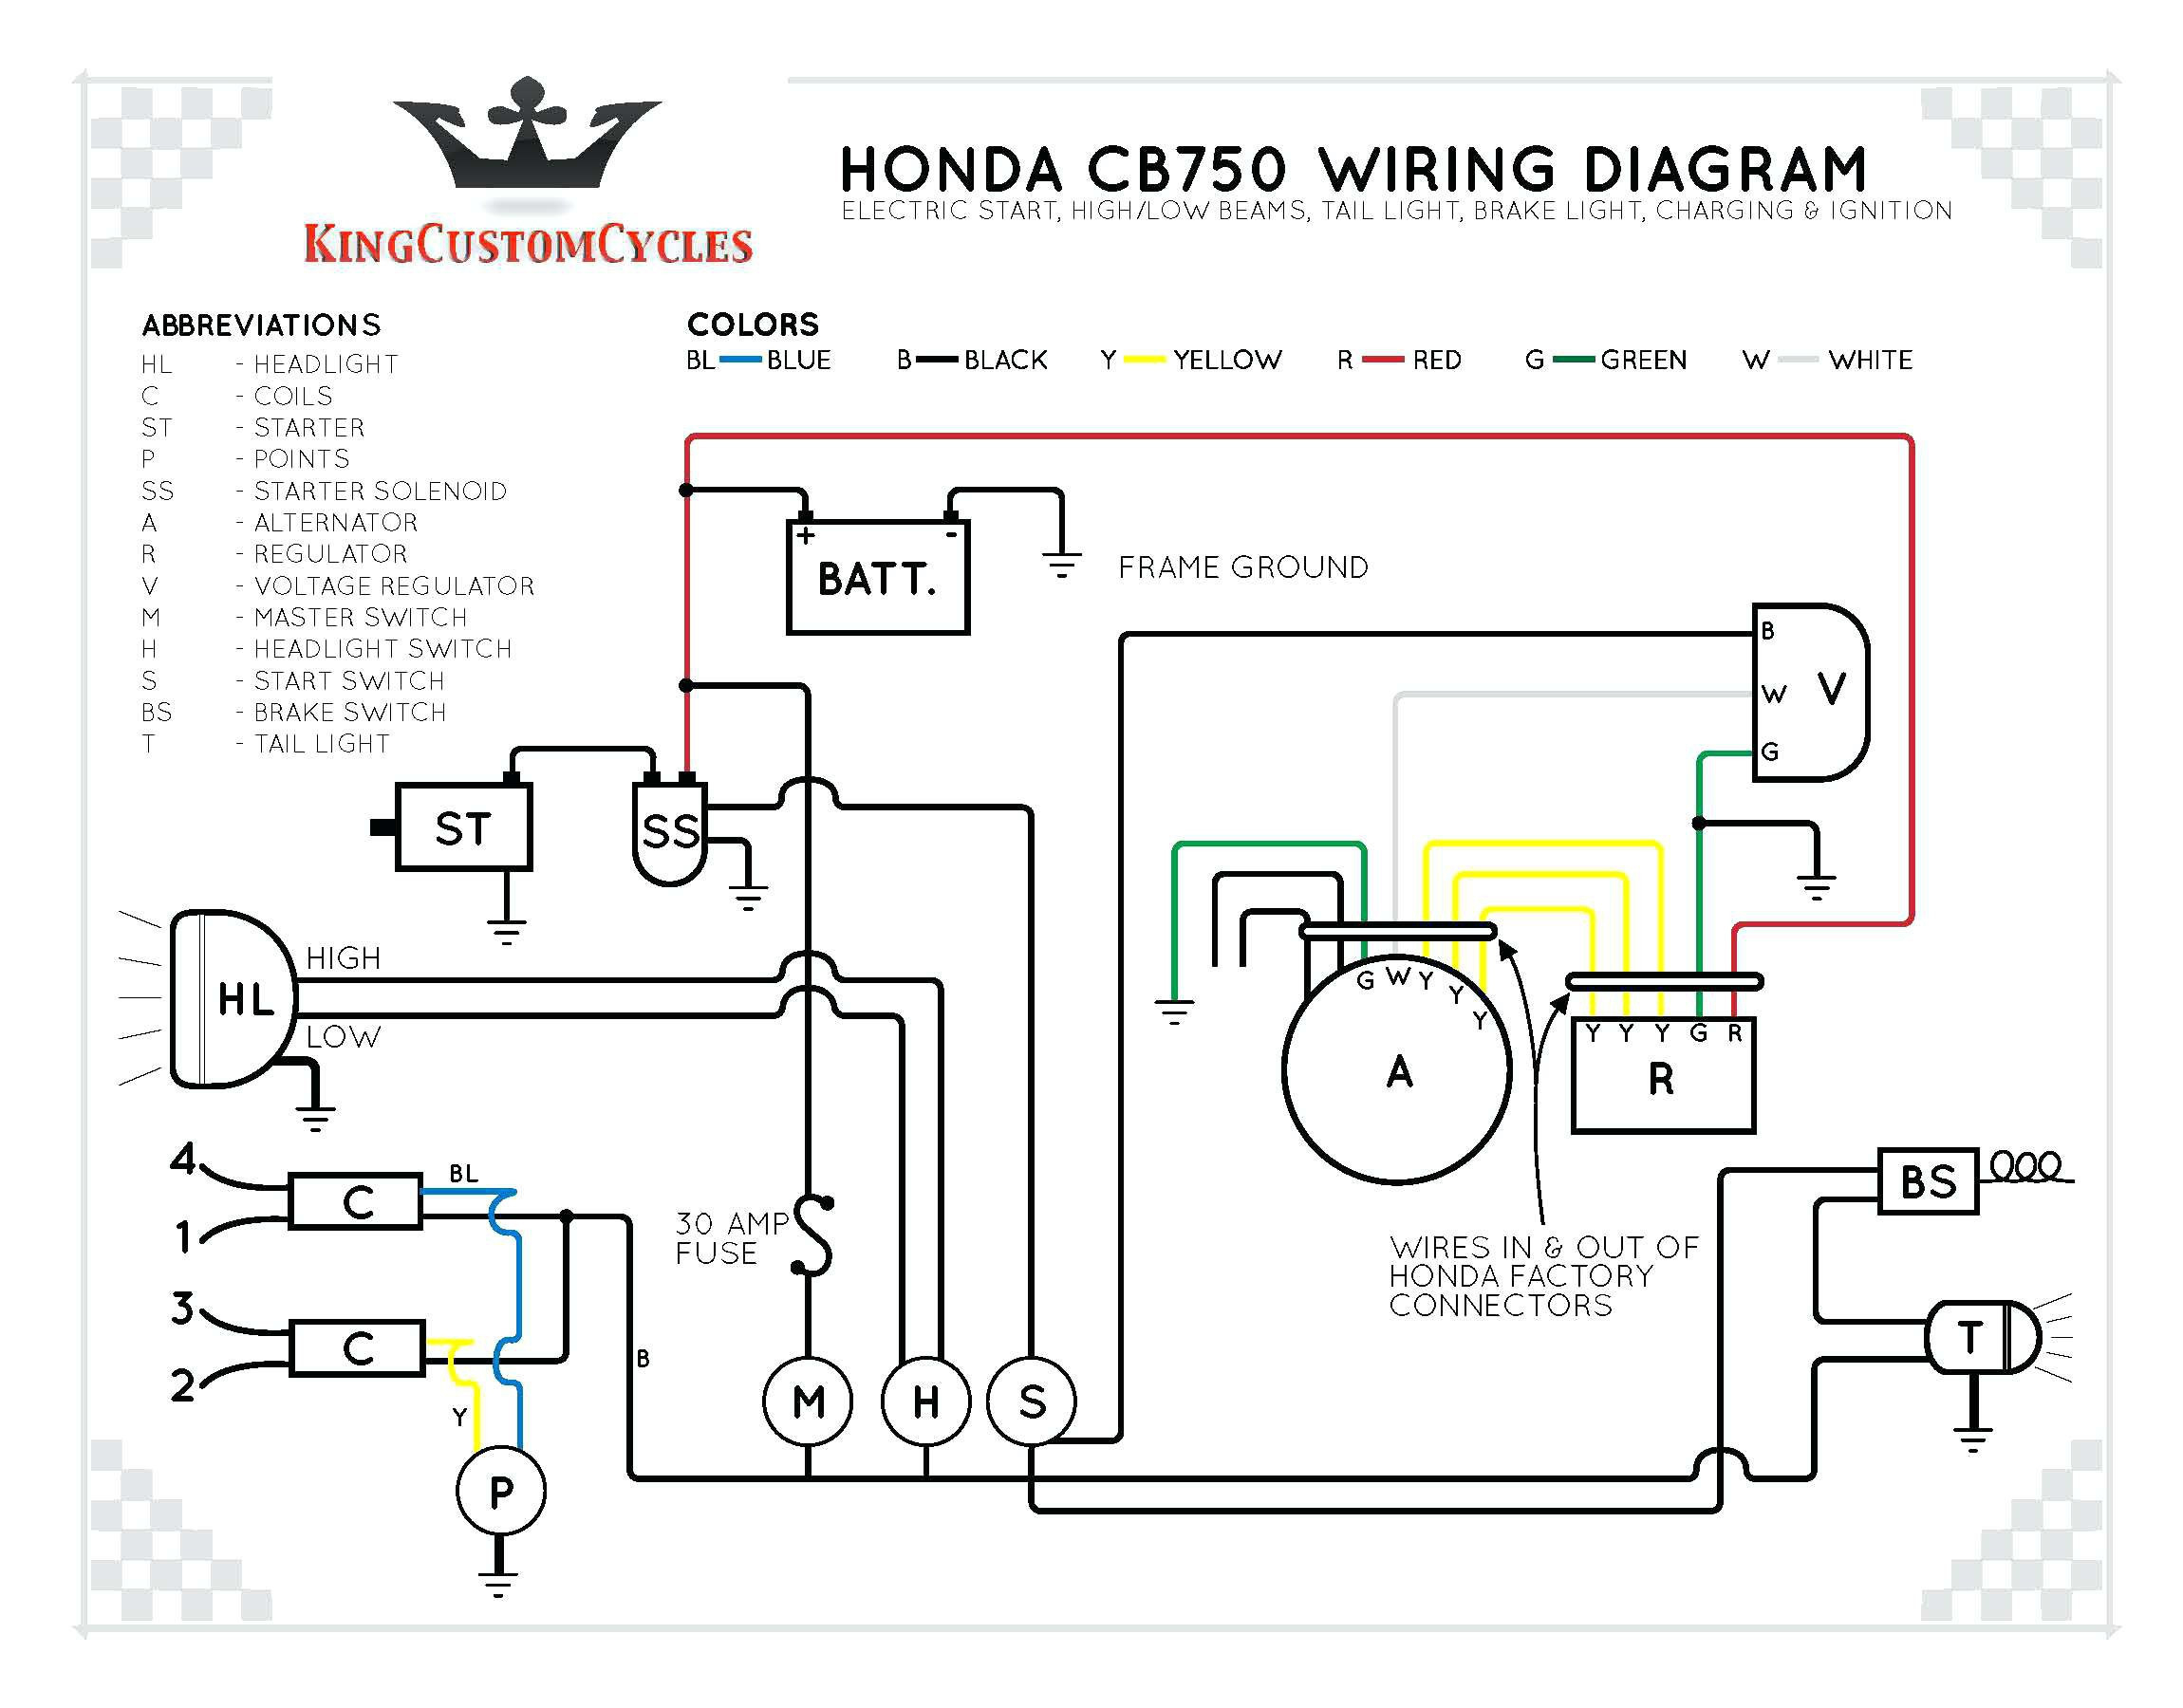 Traveller Winch Wiring Diagram Awesome Traveller Winch Wiring - Traveller Winch Wiring Diagram